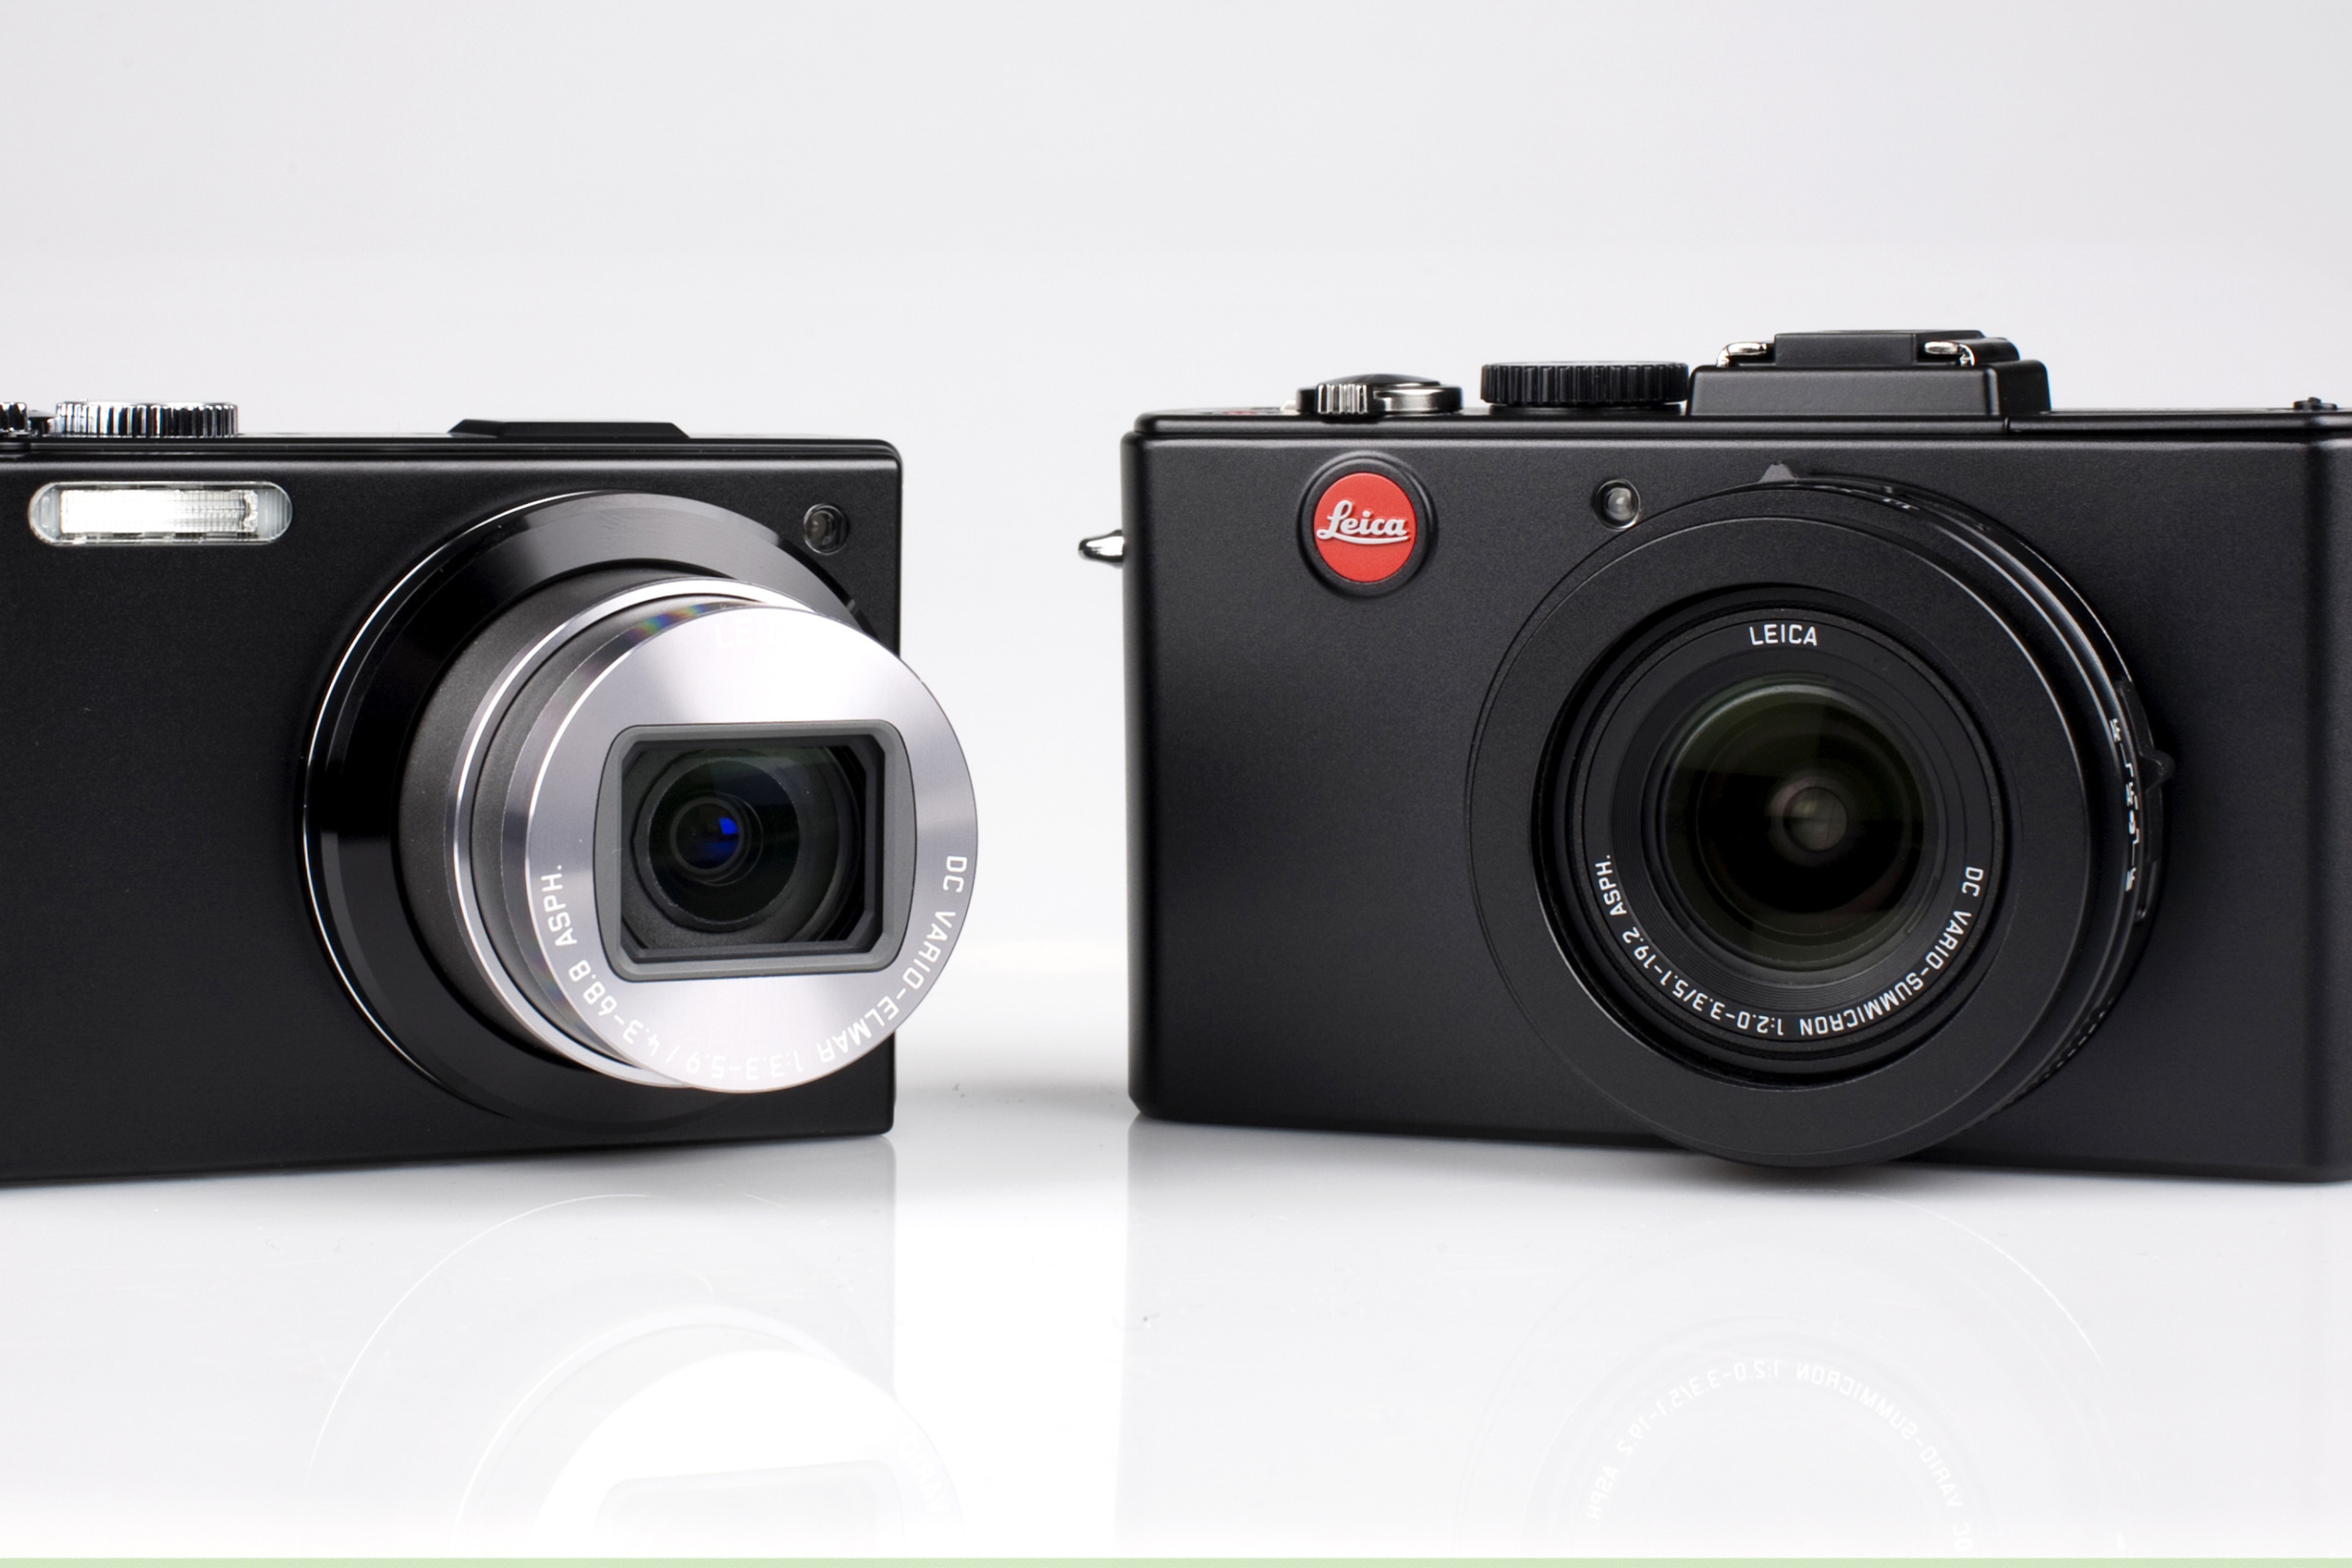 Leica D Lux 5 and Leica V LUX 1 wallpaper 2880x1920